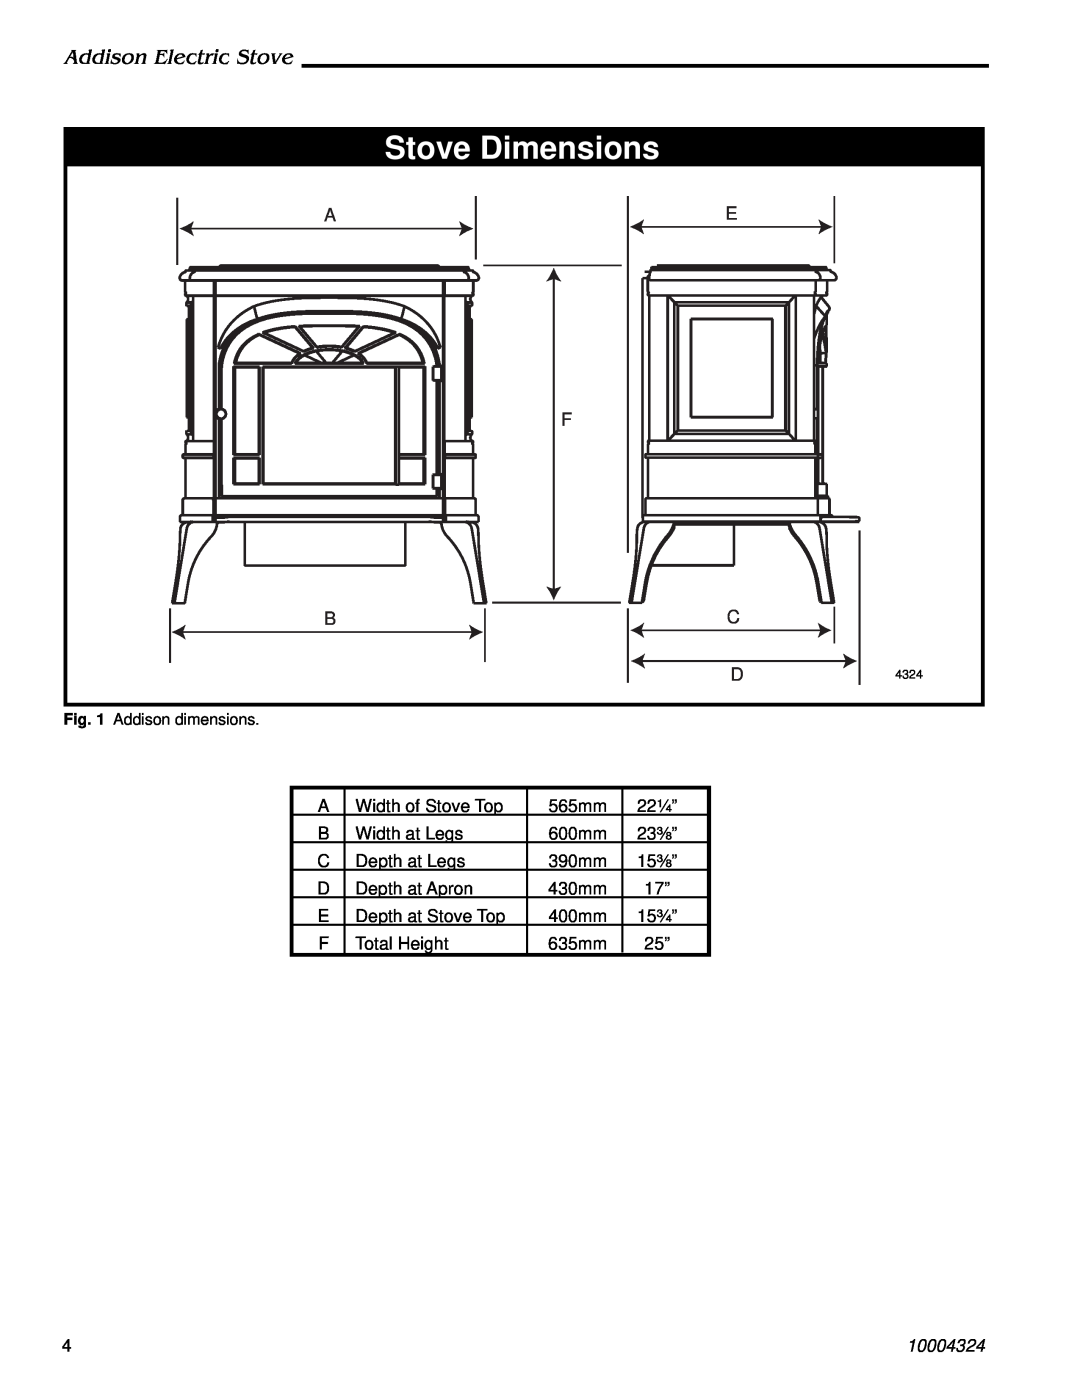 Vermont Casting ACSB installation instructions Stove Dimensions, Addison Electric Stove, 10004324 